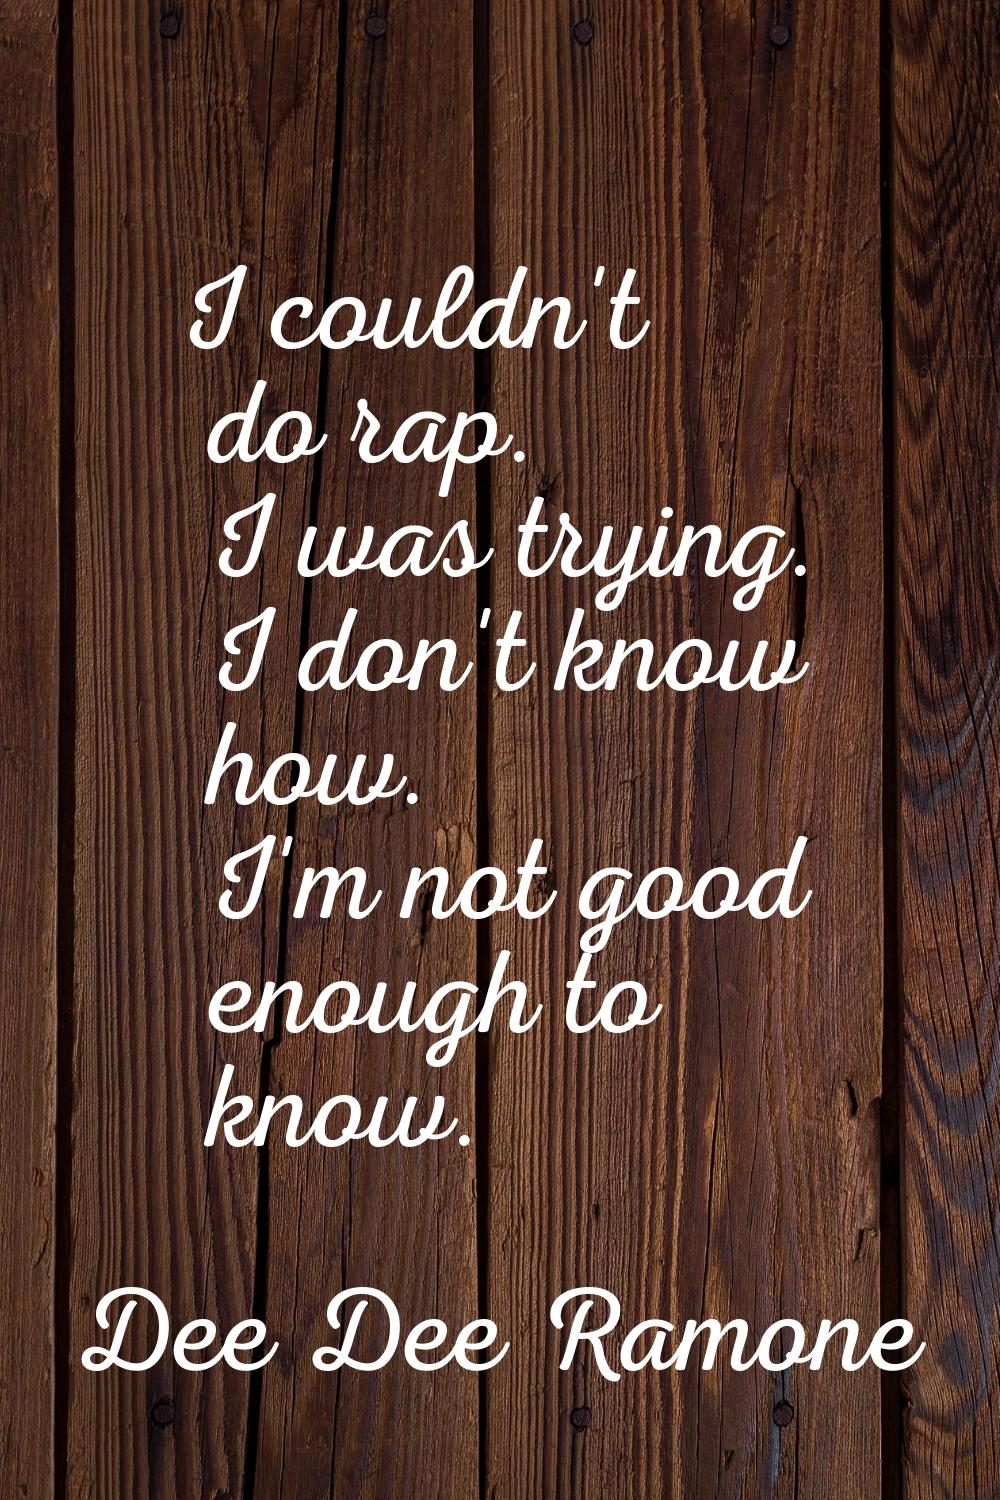 I couldn't do rap. I was trying. I don't know how. I'm not good enough to know.